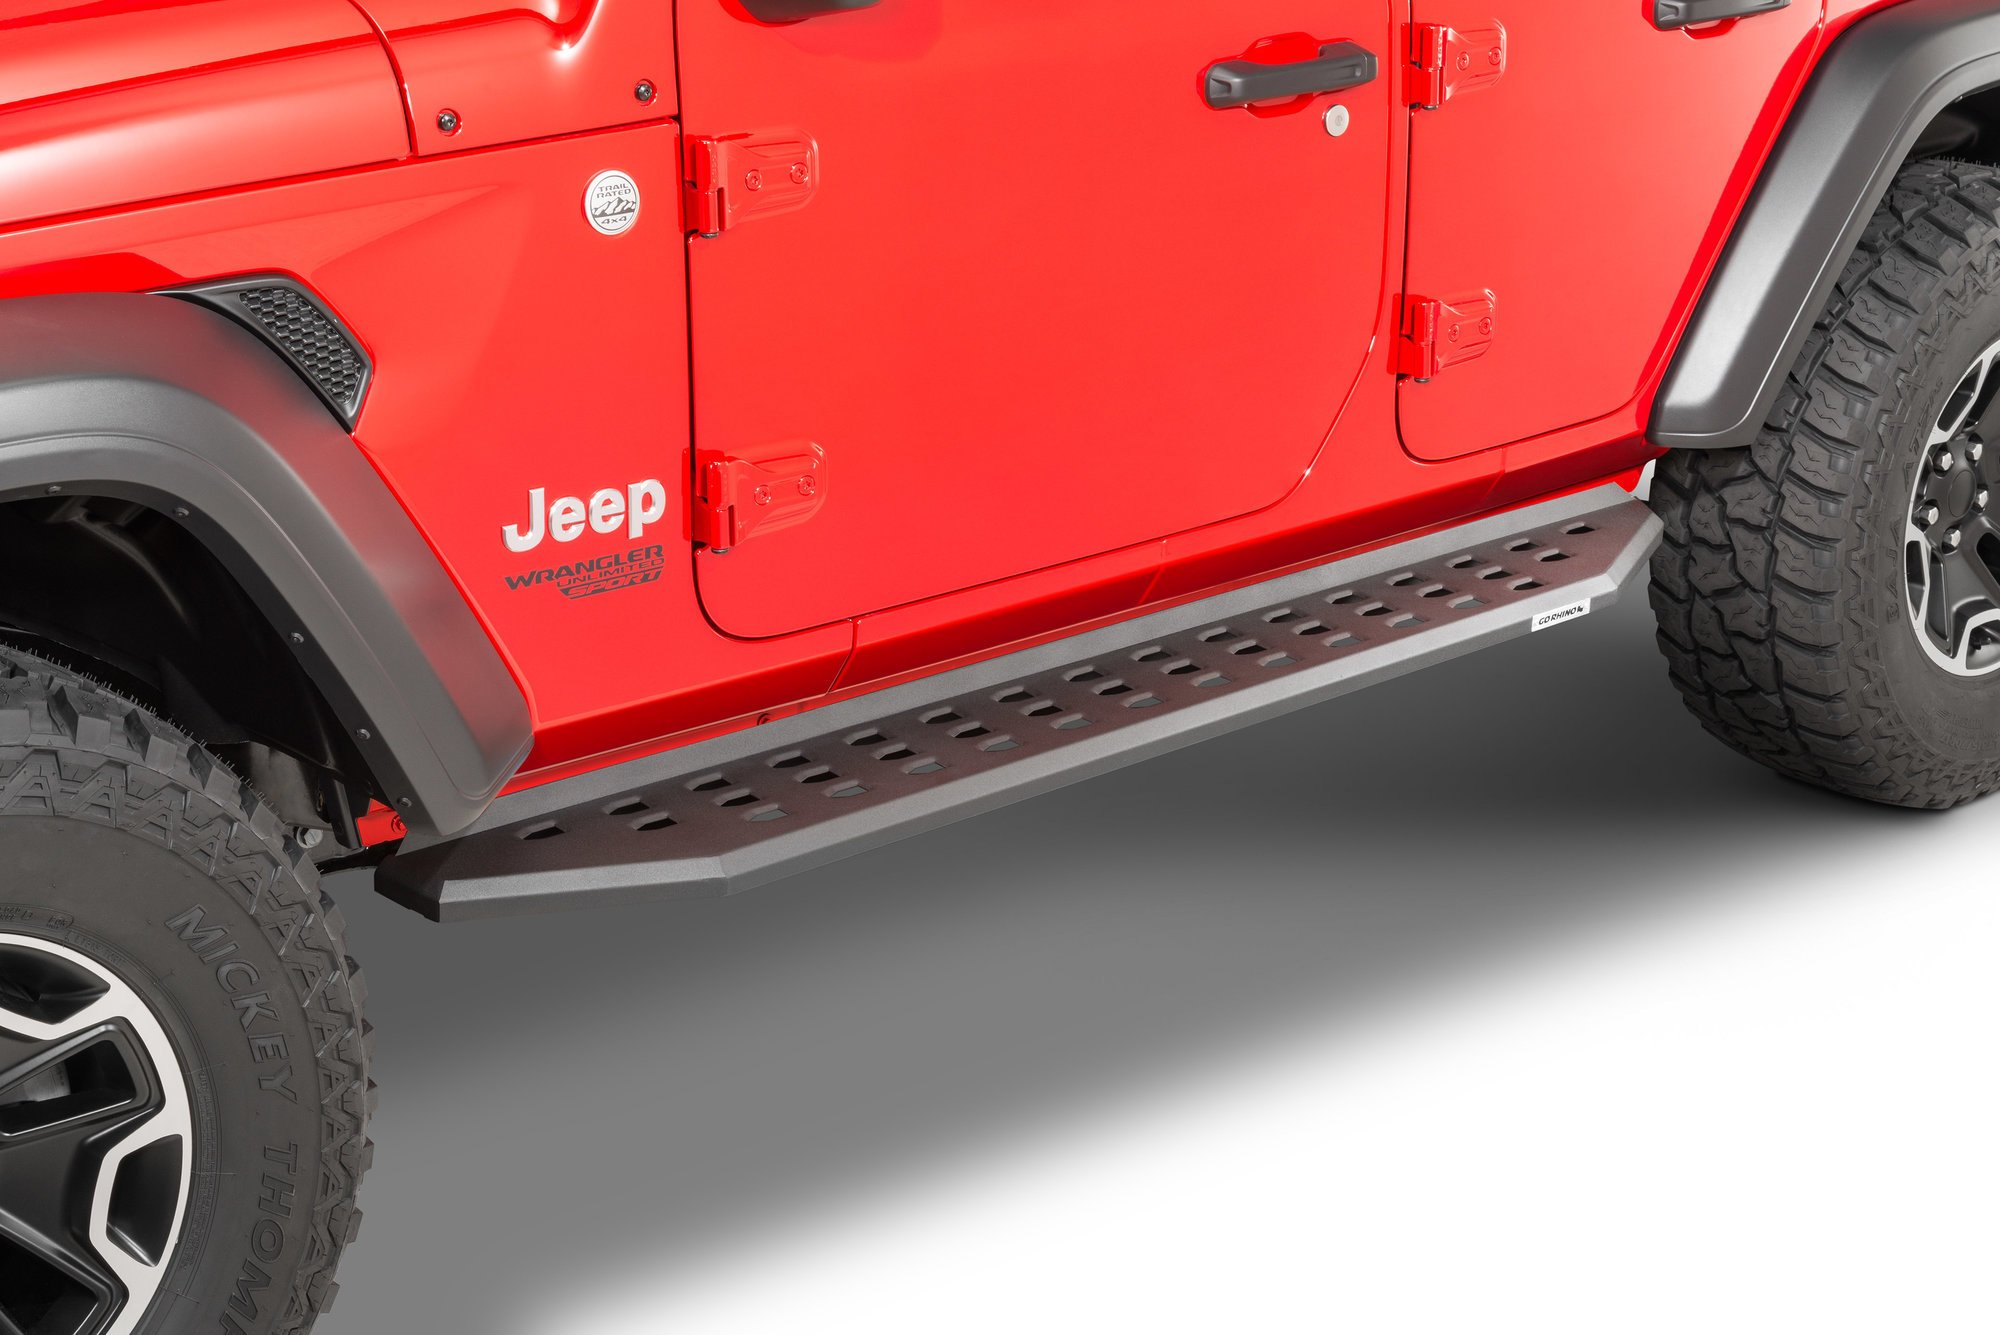 Go Rhino RB20 Running Boards for 18-20 Jeep Wrangler JL Unlimited |  Quadratec